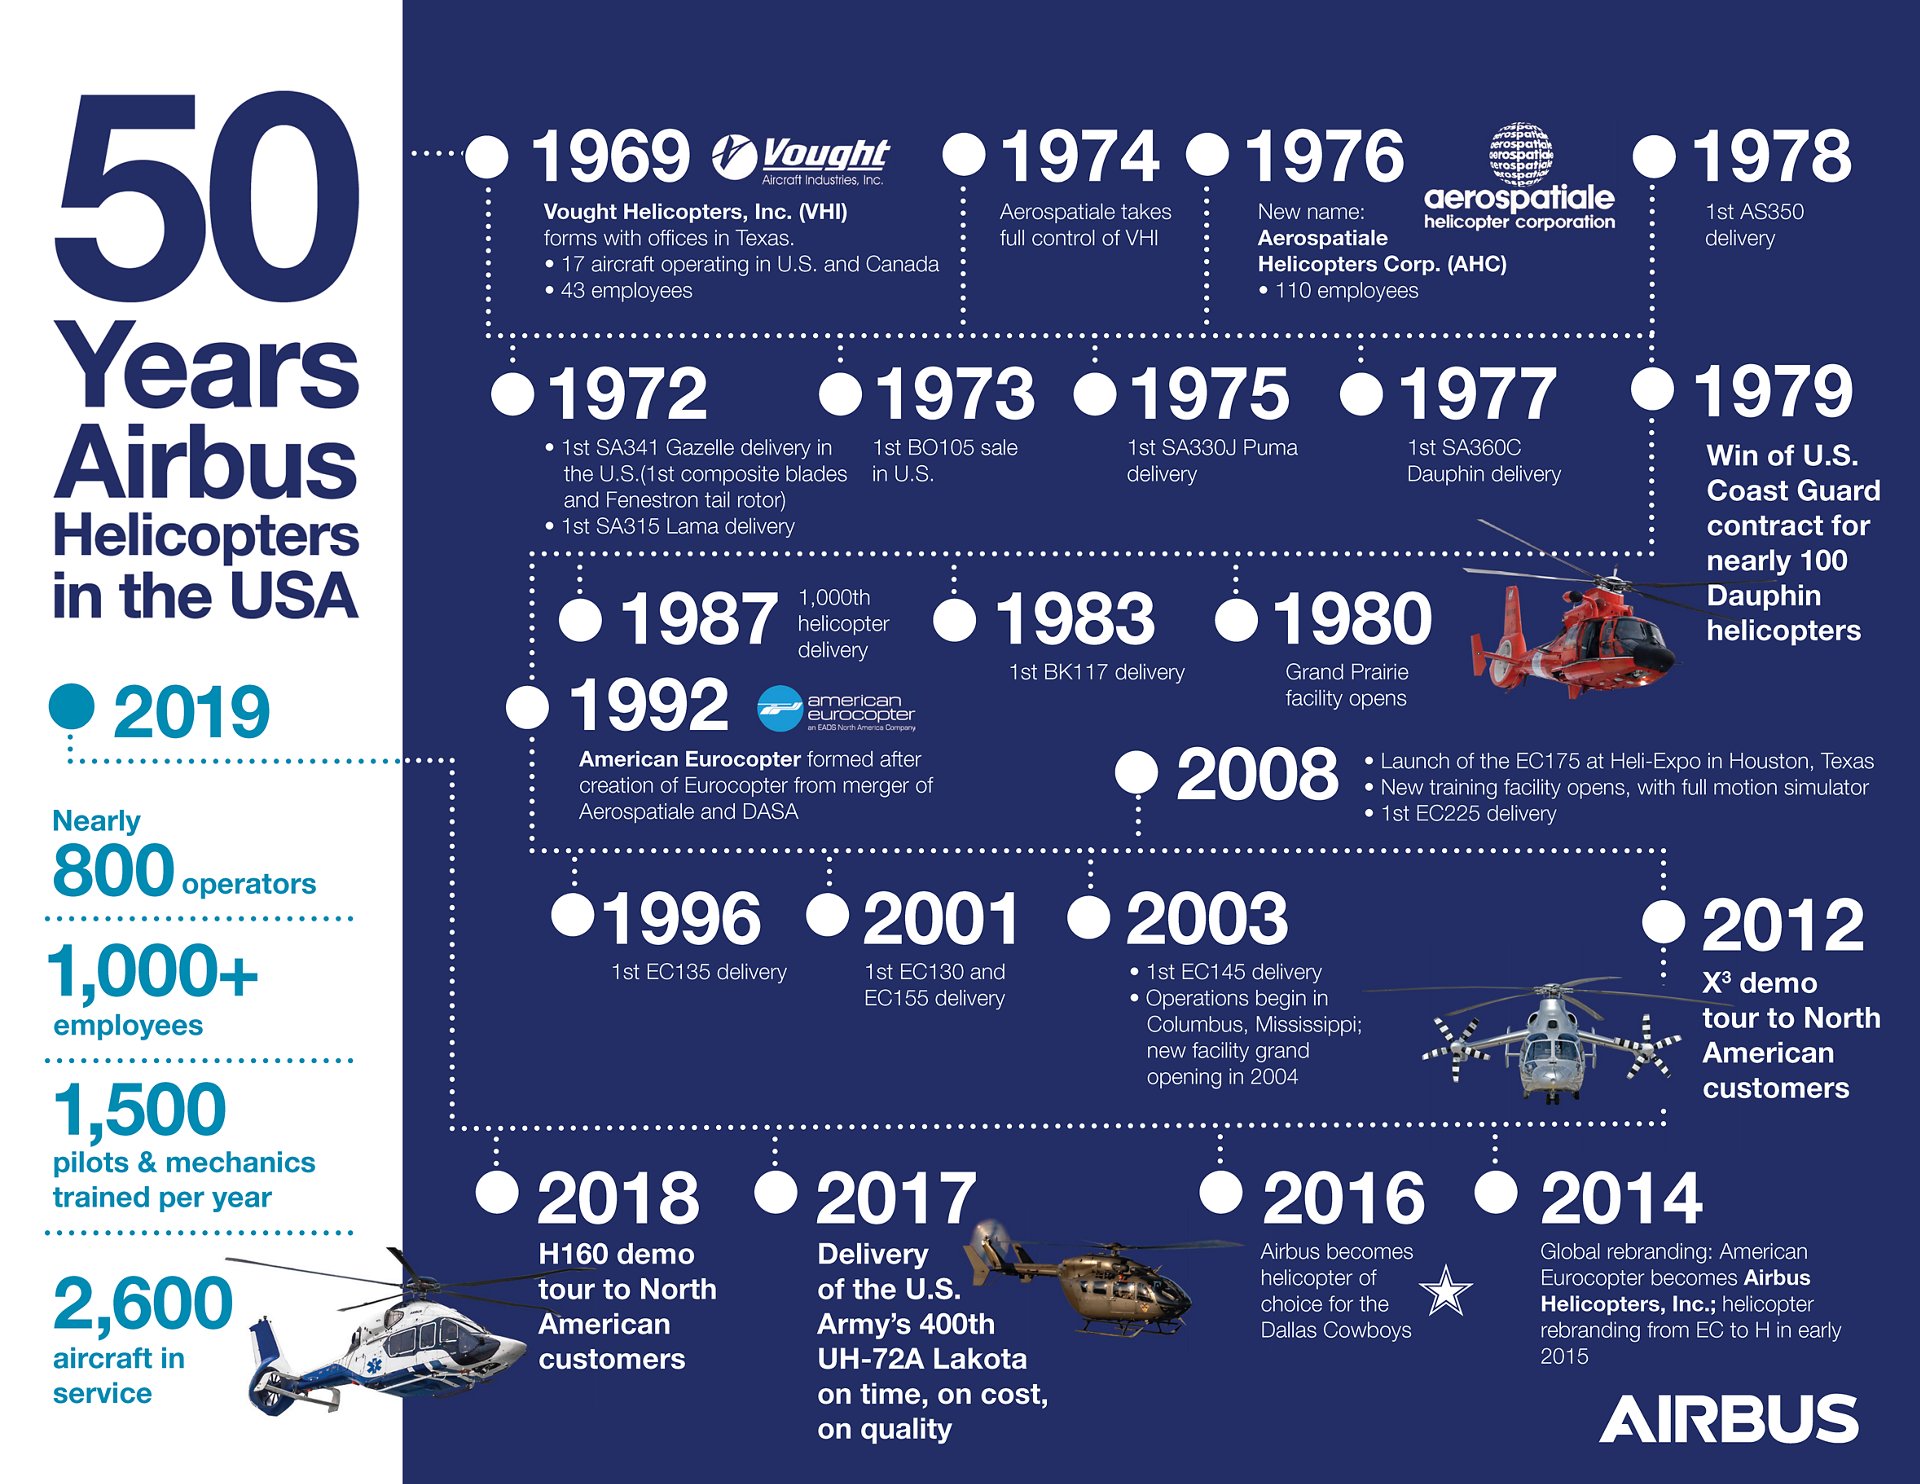 50 Years Airbus Helicopters in the USA